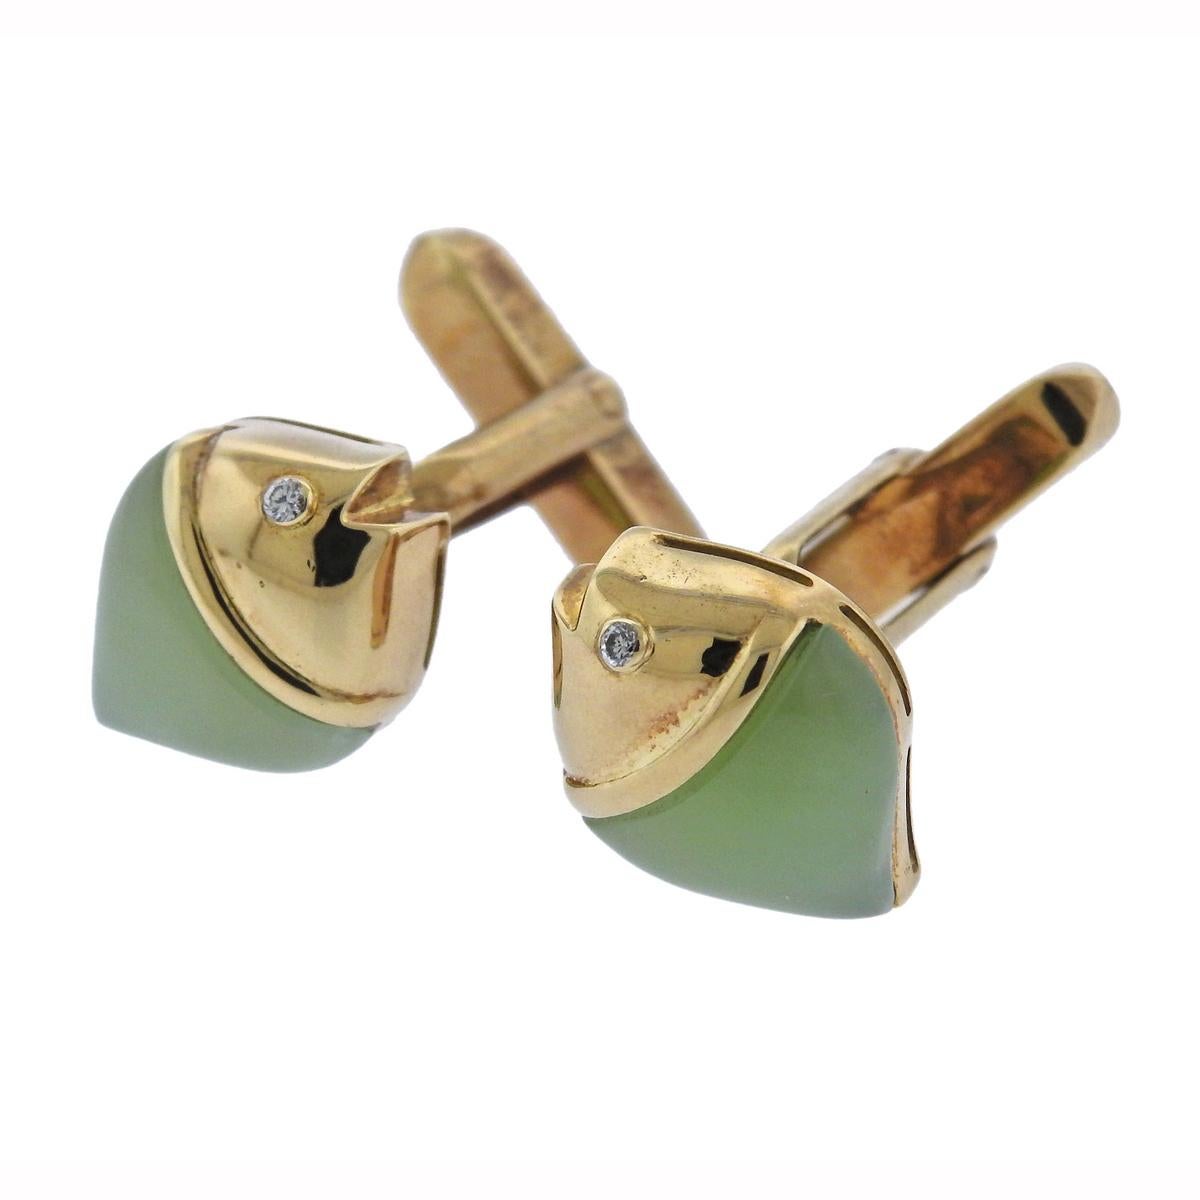 Pair of 18k yellow gold fish cufflinks by Bulgari, set with diamond eyes and chrysoprase. Cufflink top measures 15mm x 13mm and weigh 10.2 grams. Marked Bvlgari, 750.